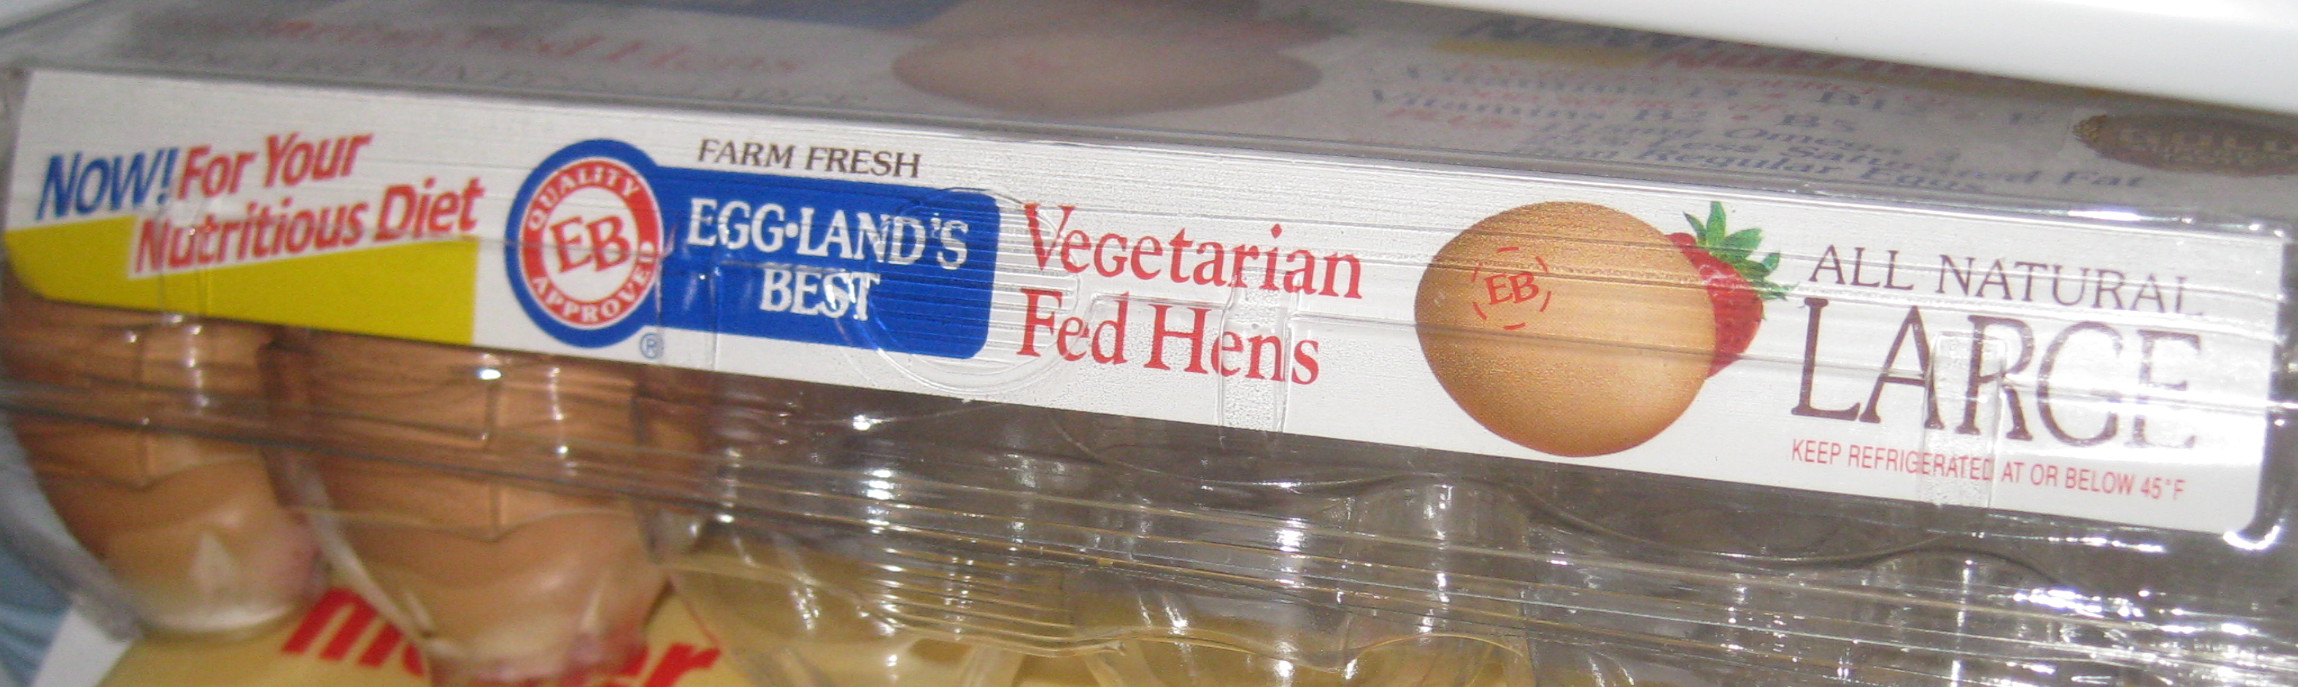 photo of a container of Eggland's Best eggs, particularly the part about Vegetarian Fed Hens